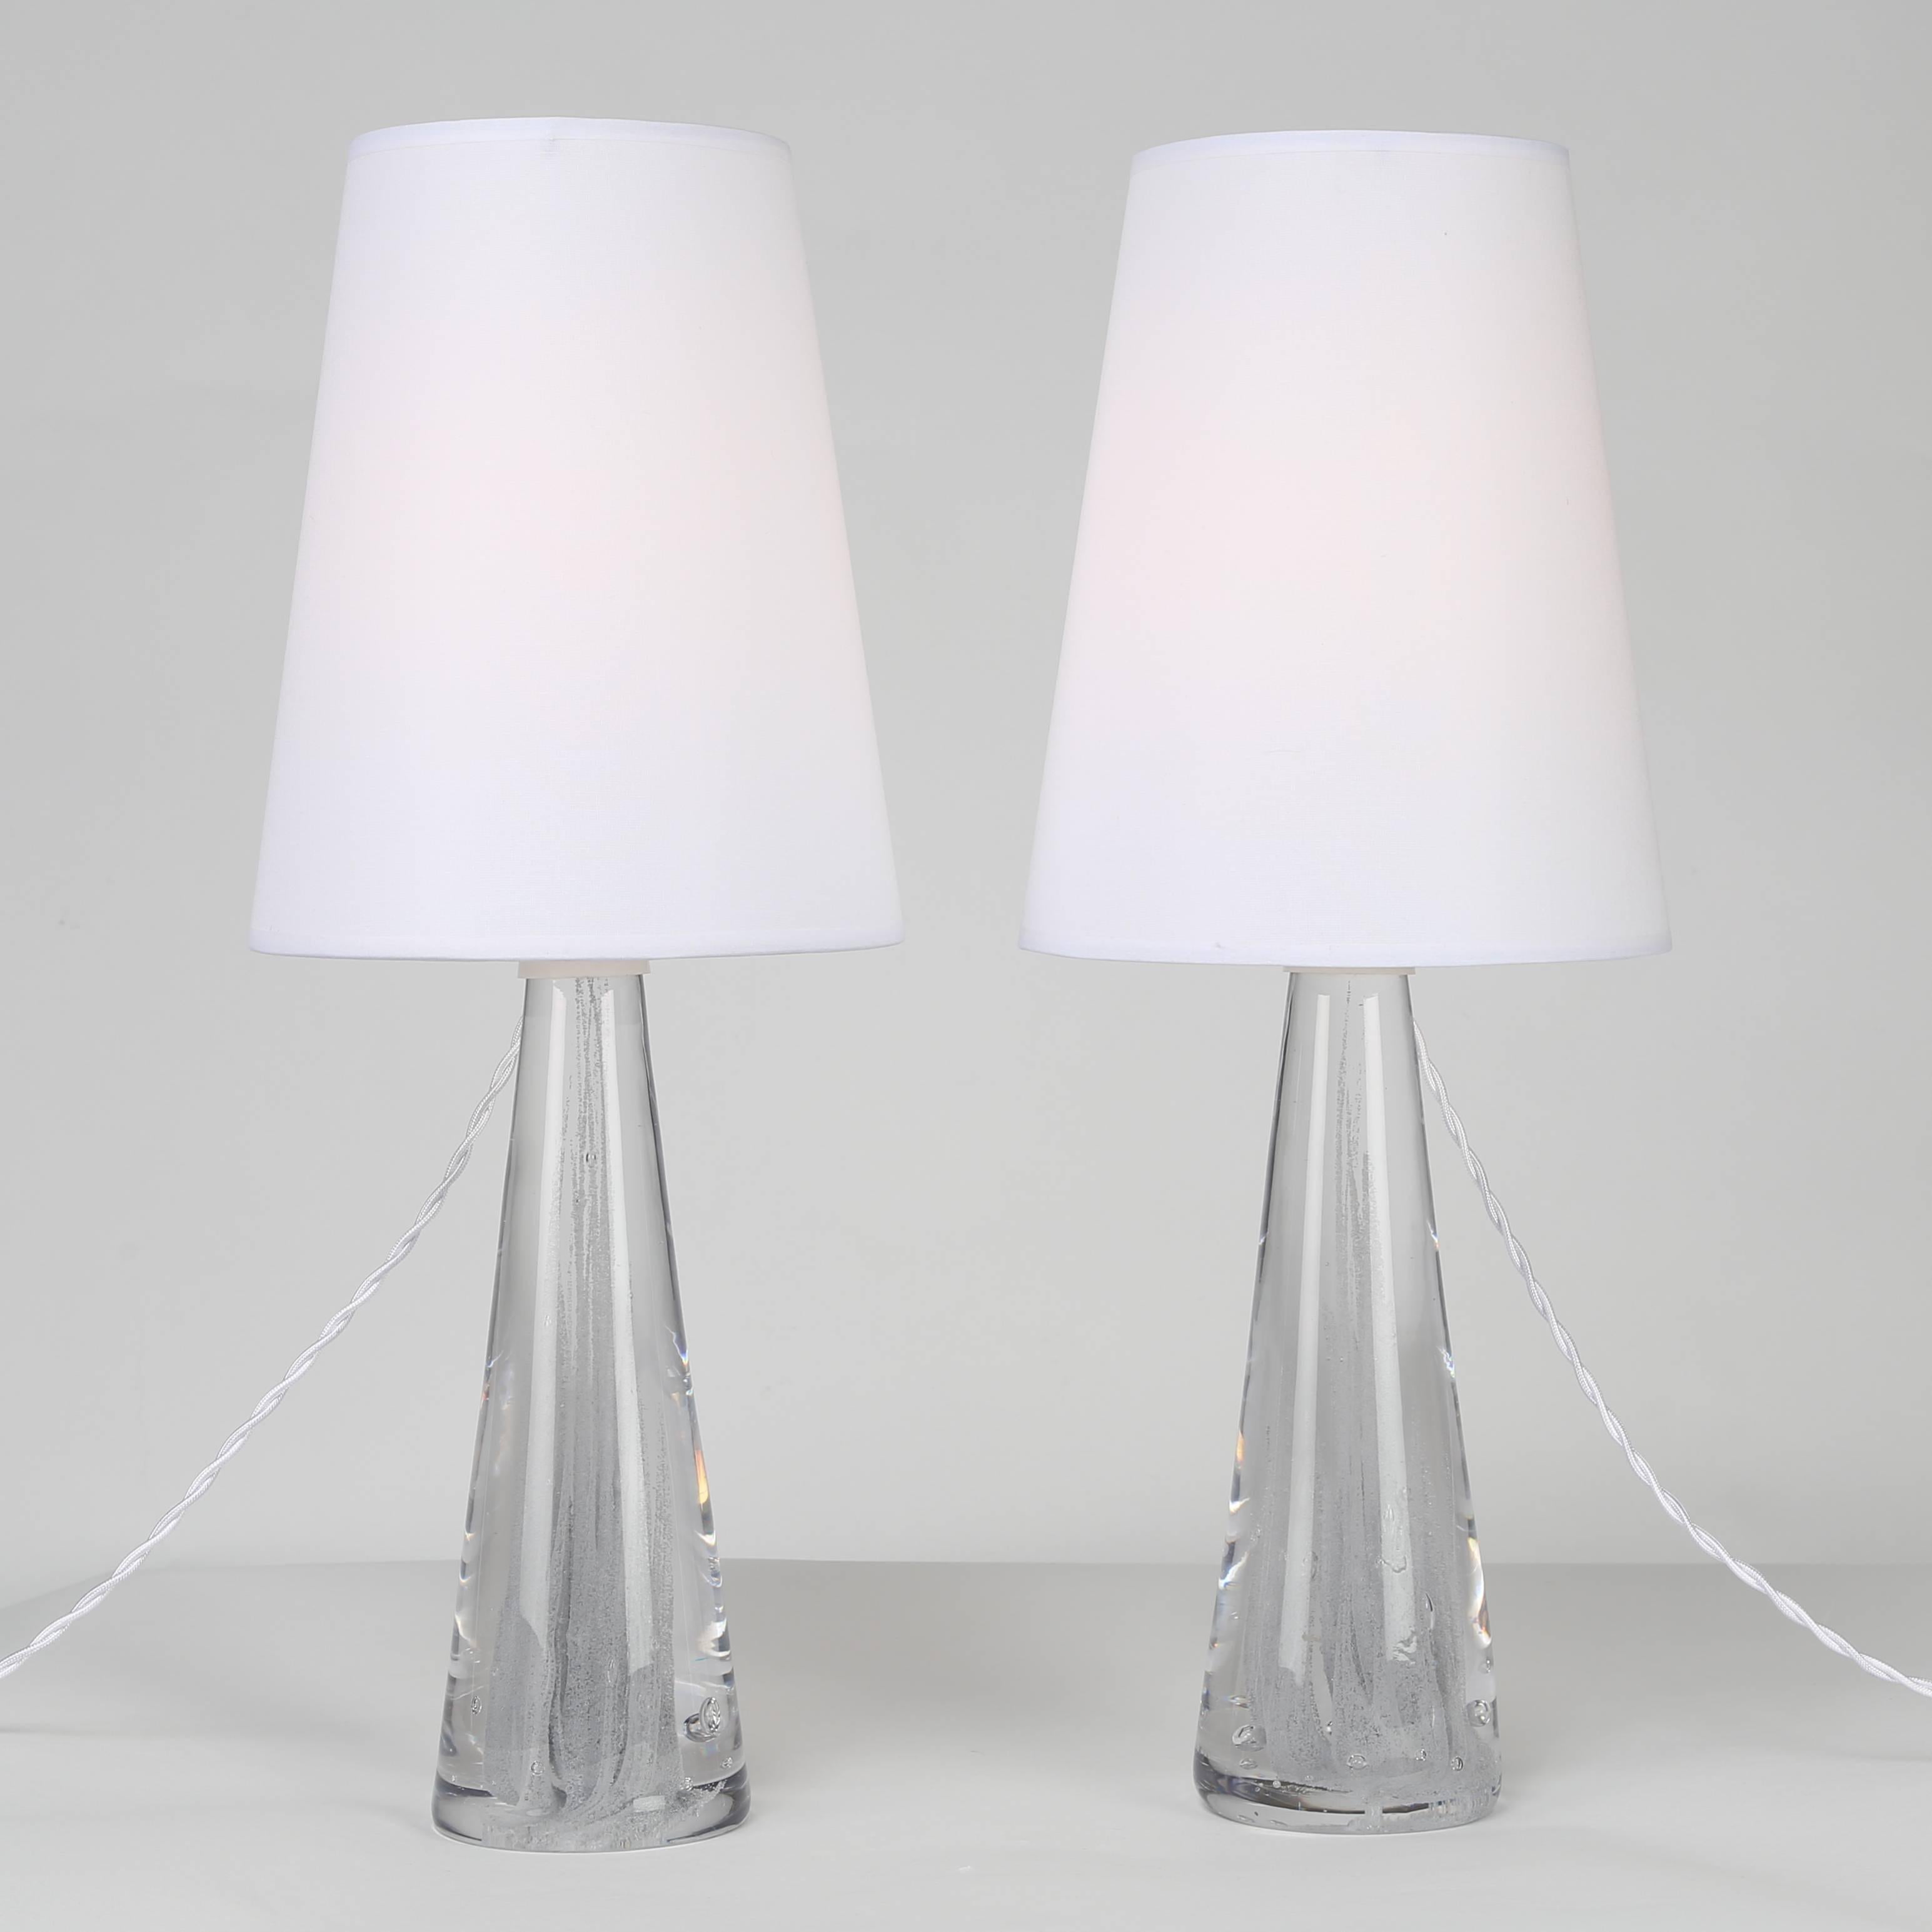 Gorgeous pair of very heavy conical glass lamps with streams of internal bubbles, circa 1960s. Etched signature “Kosta B L 63